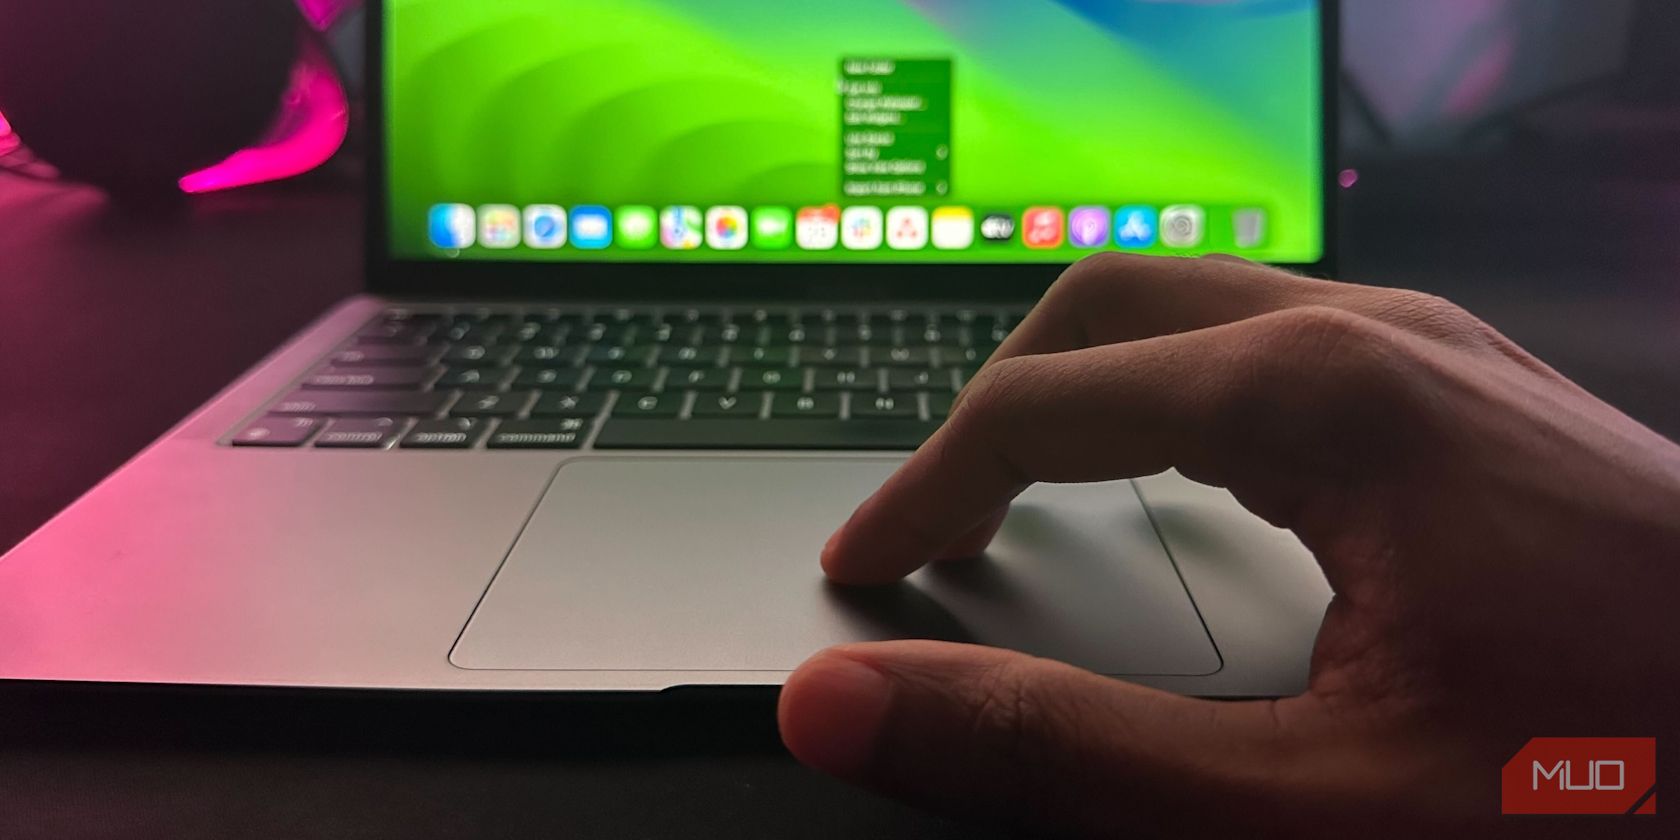 A MacBook user right-clicking on the trackpad